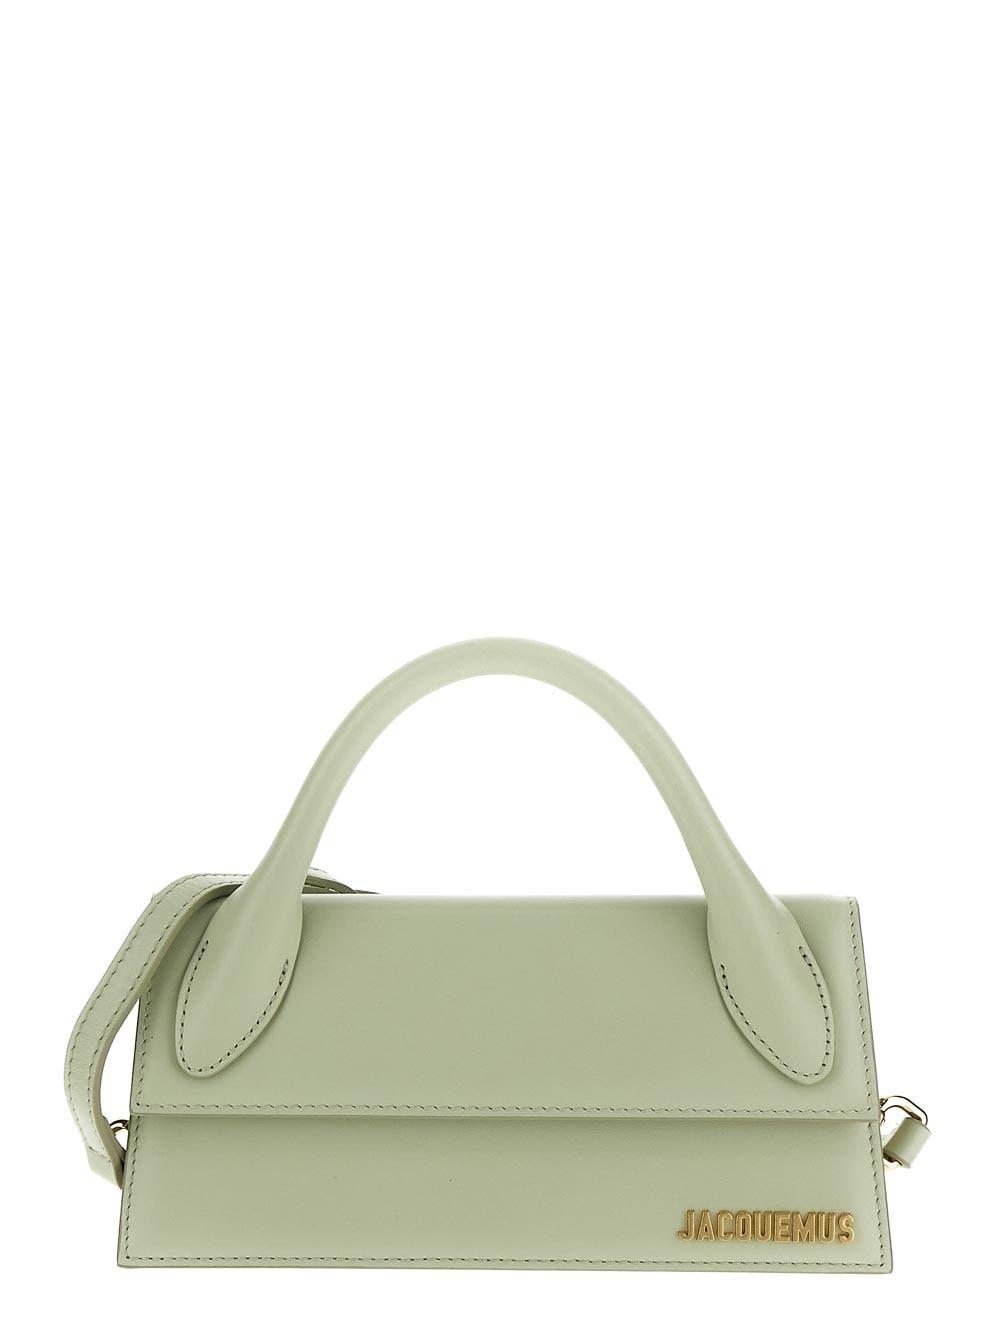 Jacquemus Le Chiquito Long in Green